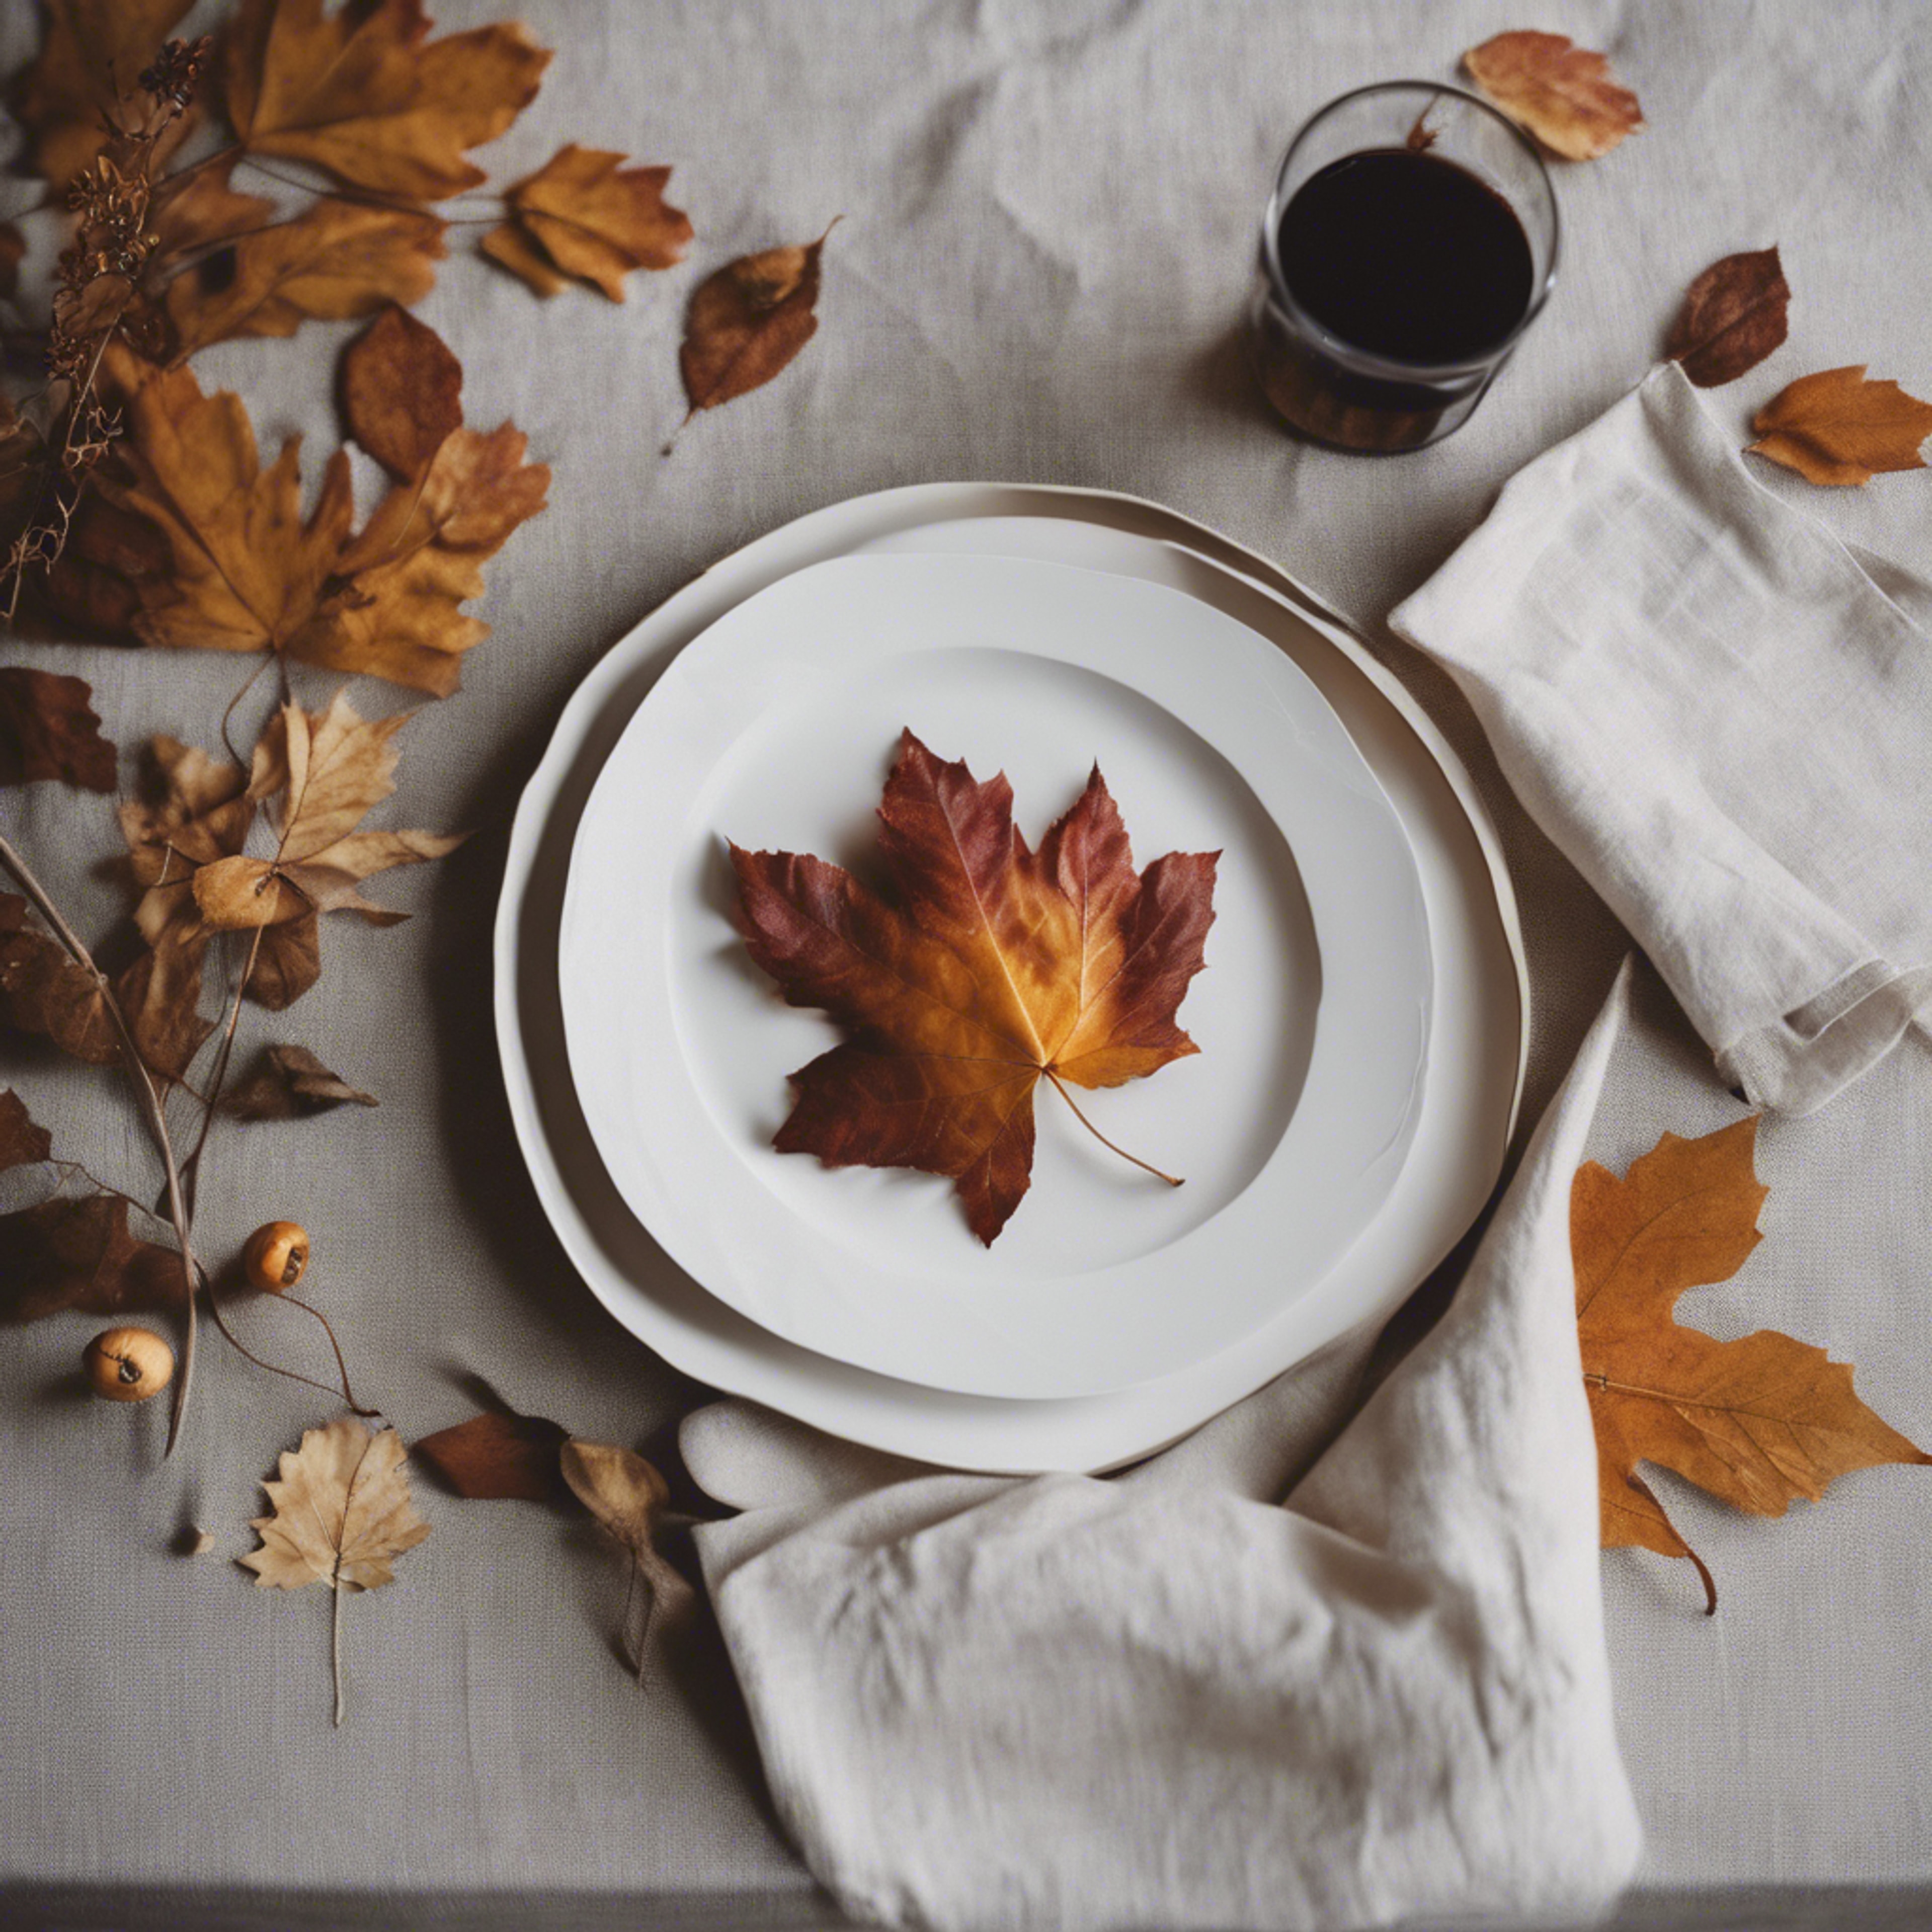 Simplicity-lover's Thanksgiving table decor with minimalistic white plates, natural linen napkins, and a few scattered autumn leaves. Tapet[4fdd30c95e164a8e8309]